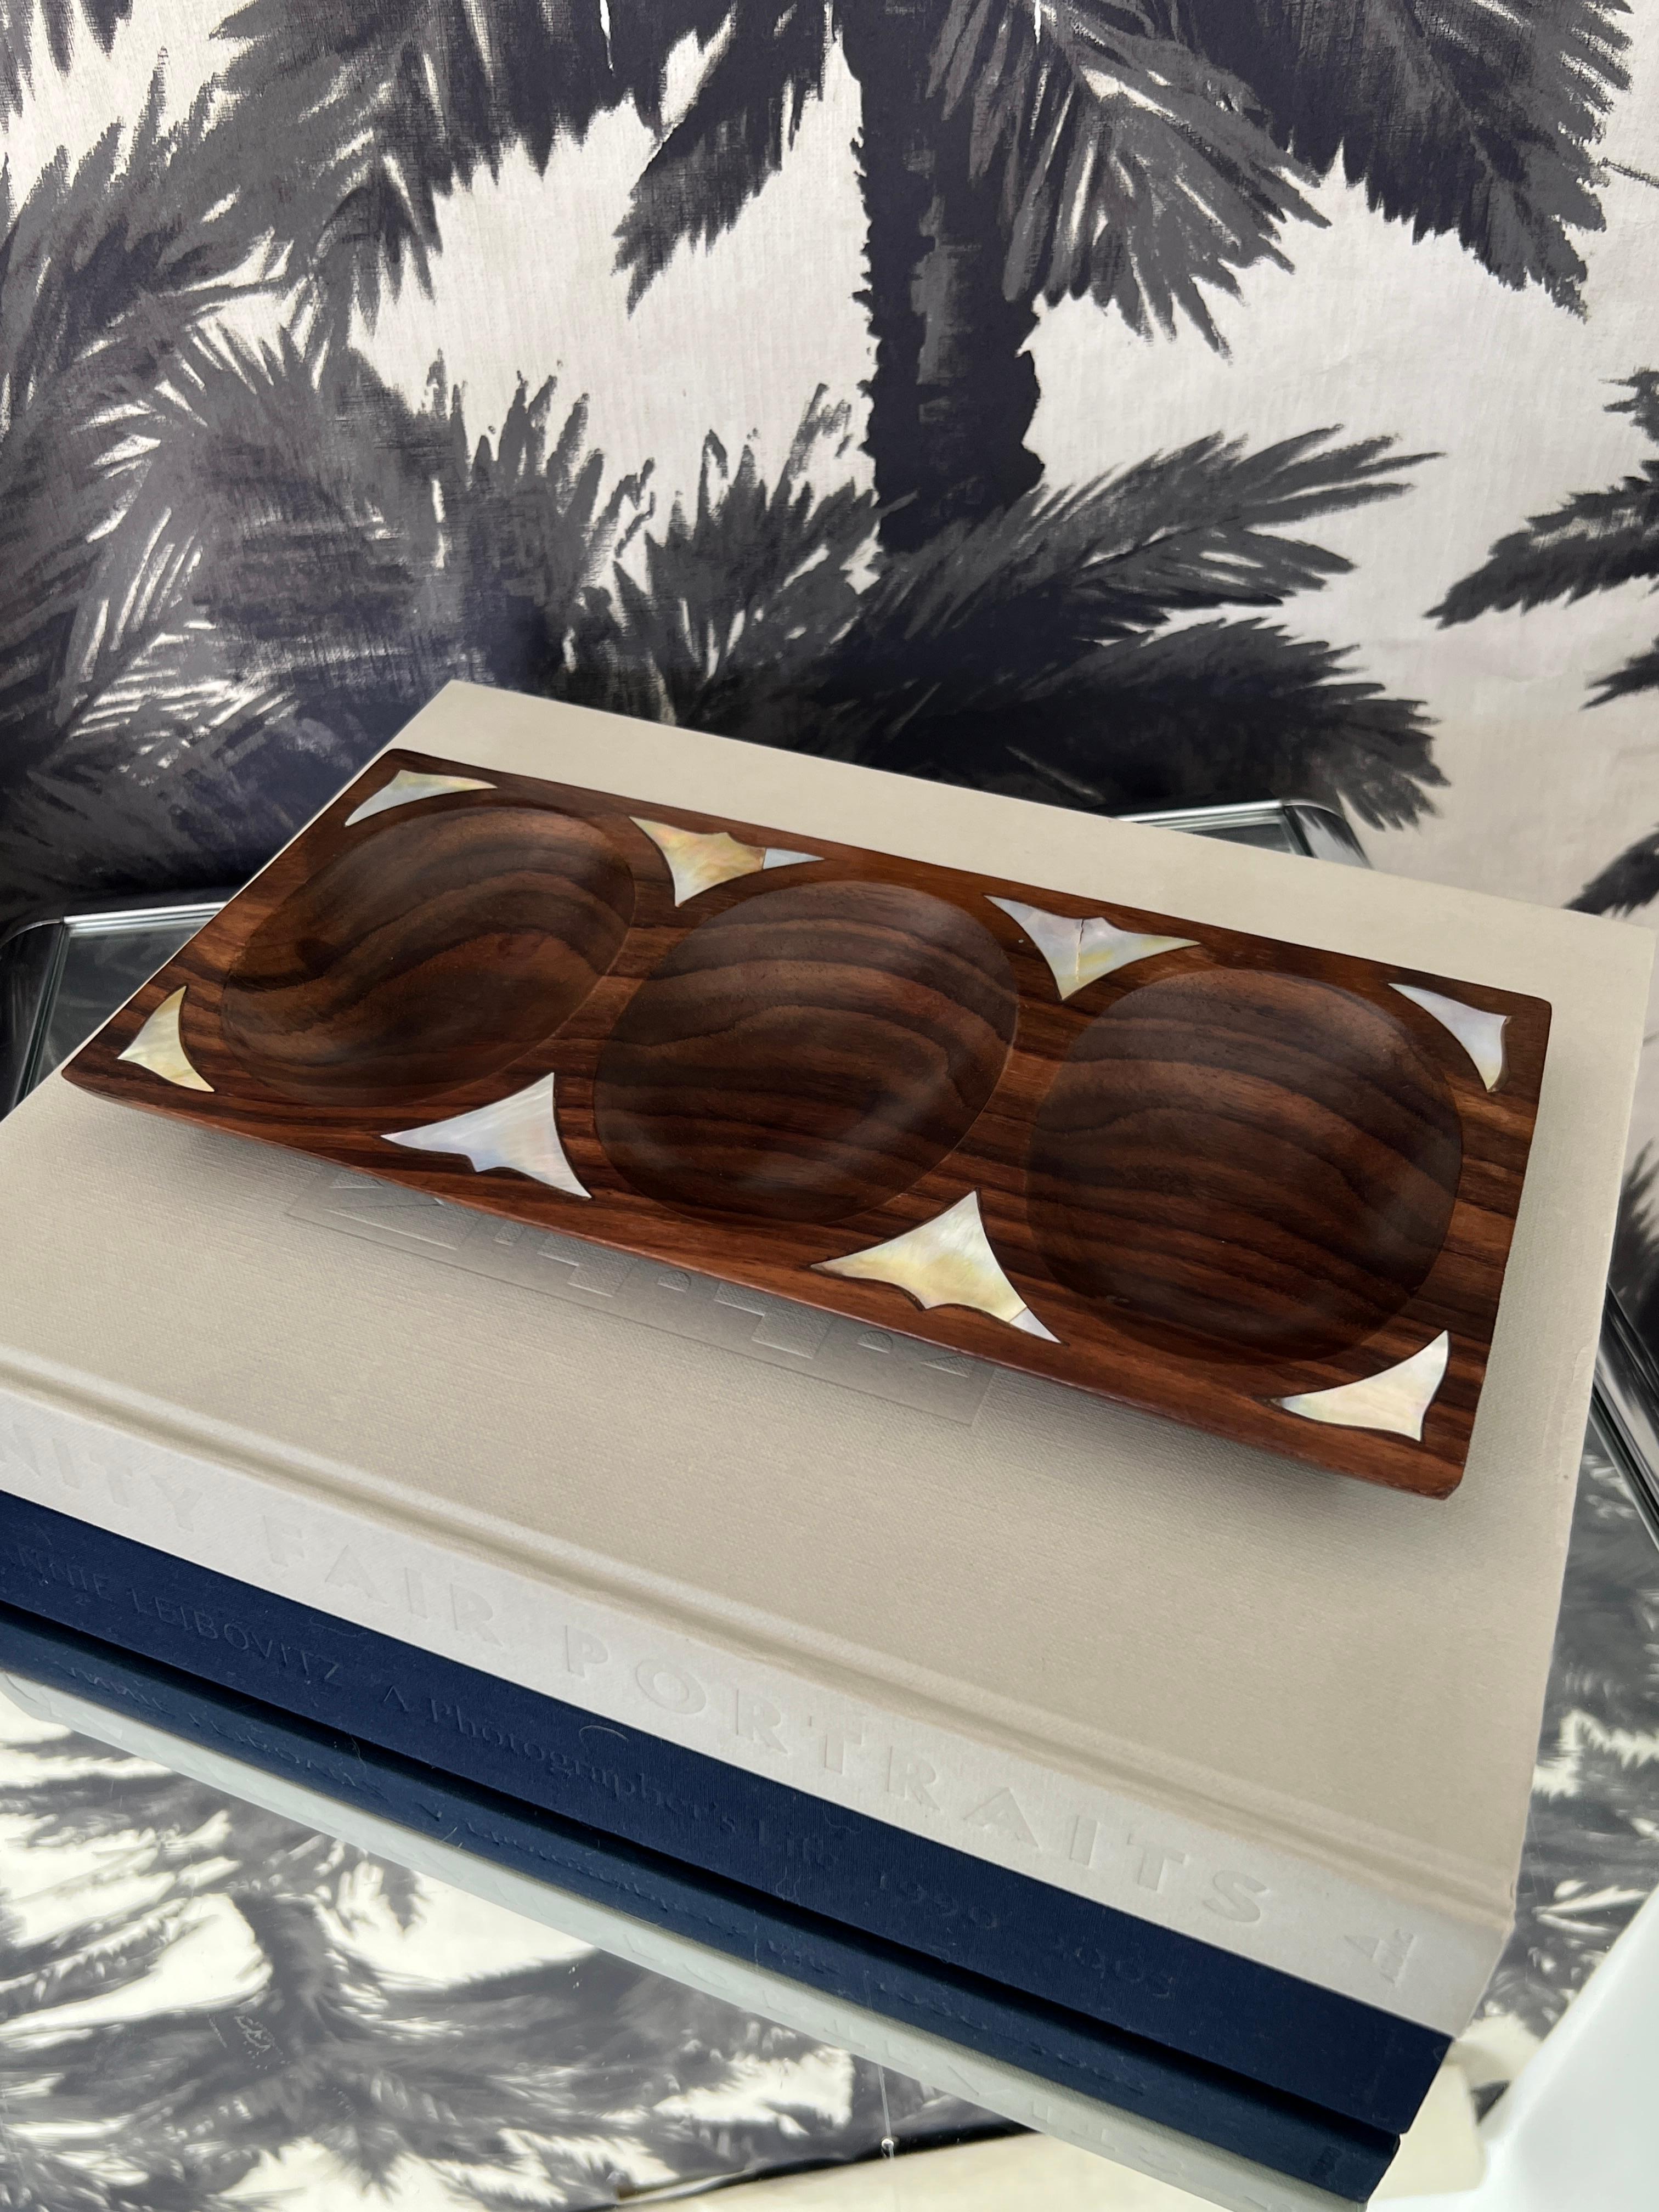 Mid-Century Modern Danish Modern Divided Tray in Rosewood with Mother of Pearl Inlays, c. 1960's For Sale